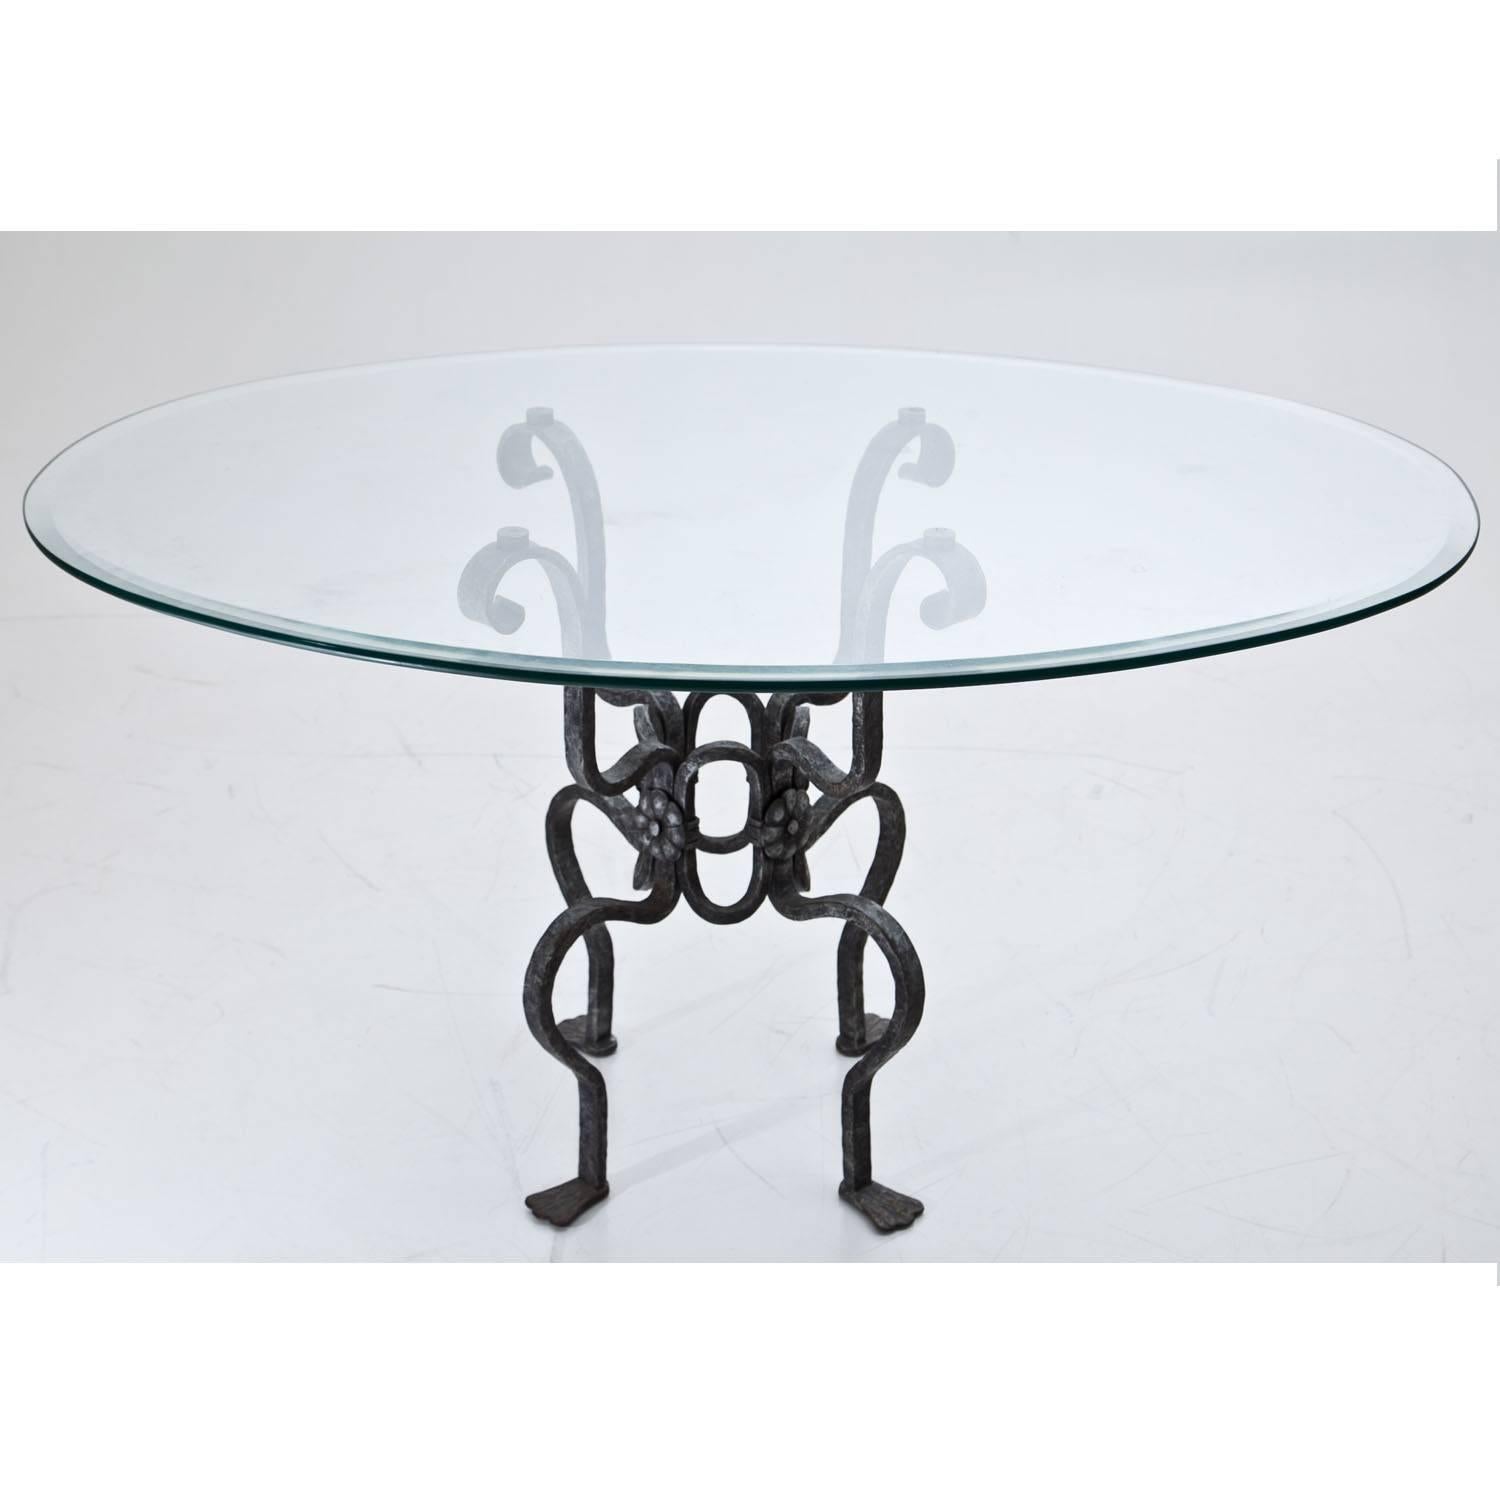 Mid-Century Modern Iron Table and Chairs, Italy, 1950s